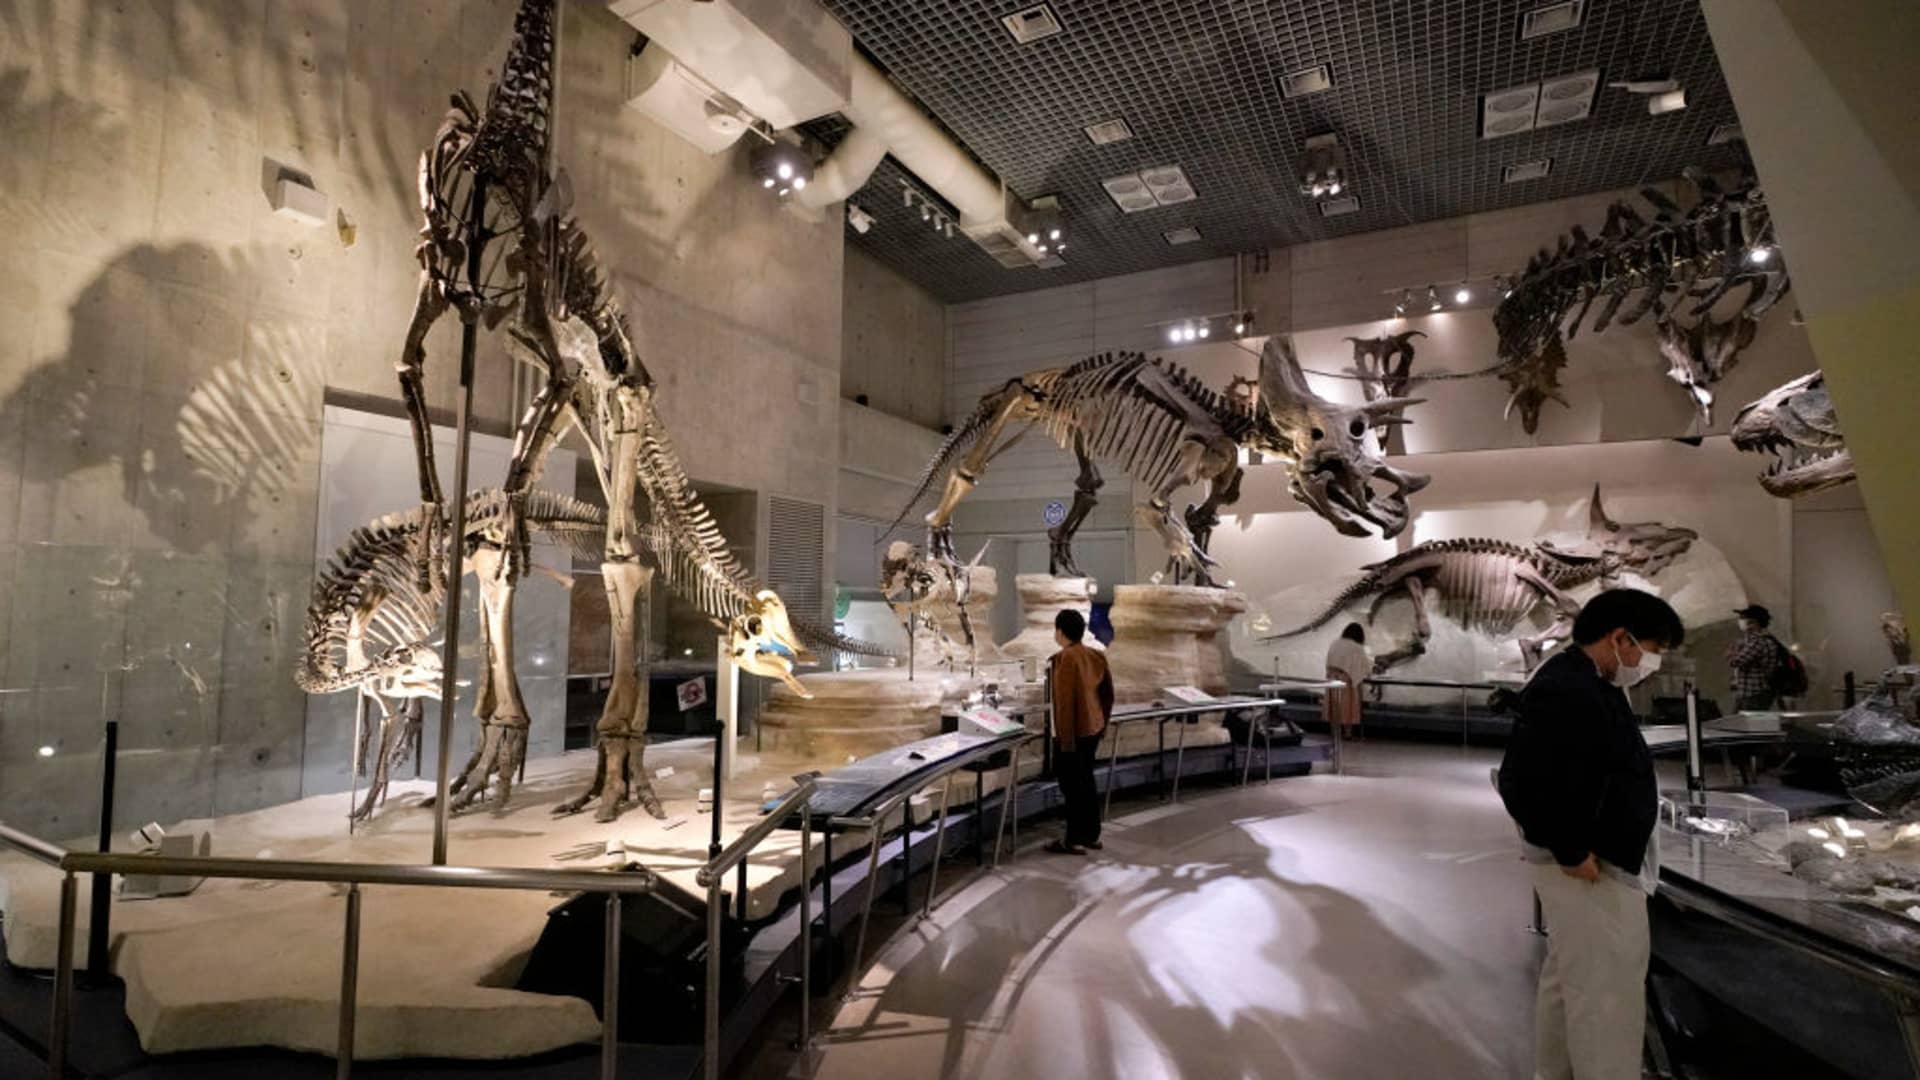 Visitors can explore the virtual walkways of the National Museum of Nature and Science in Tokyo, Japan.